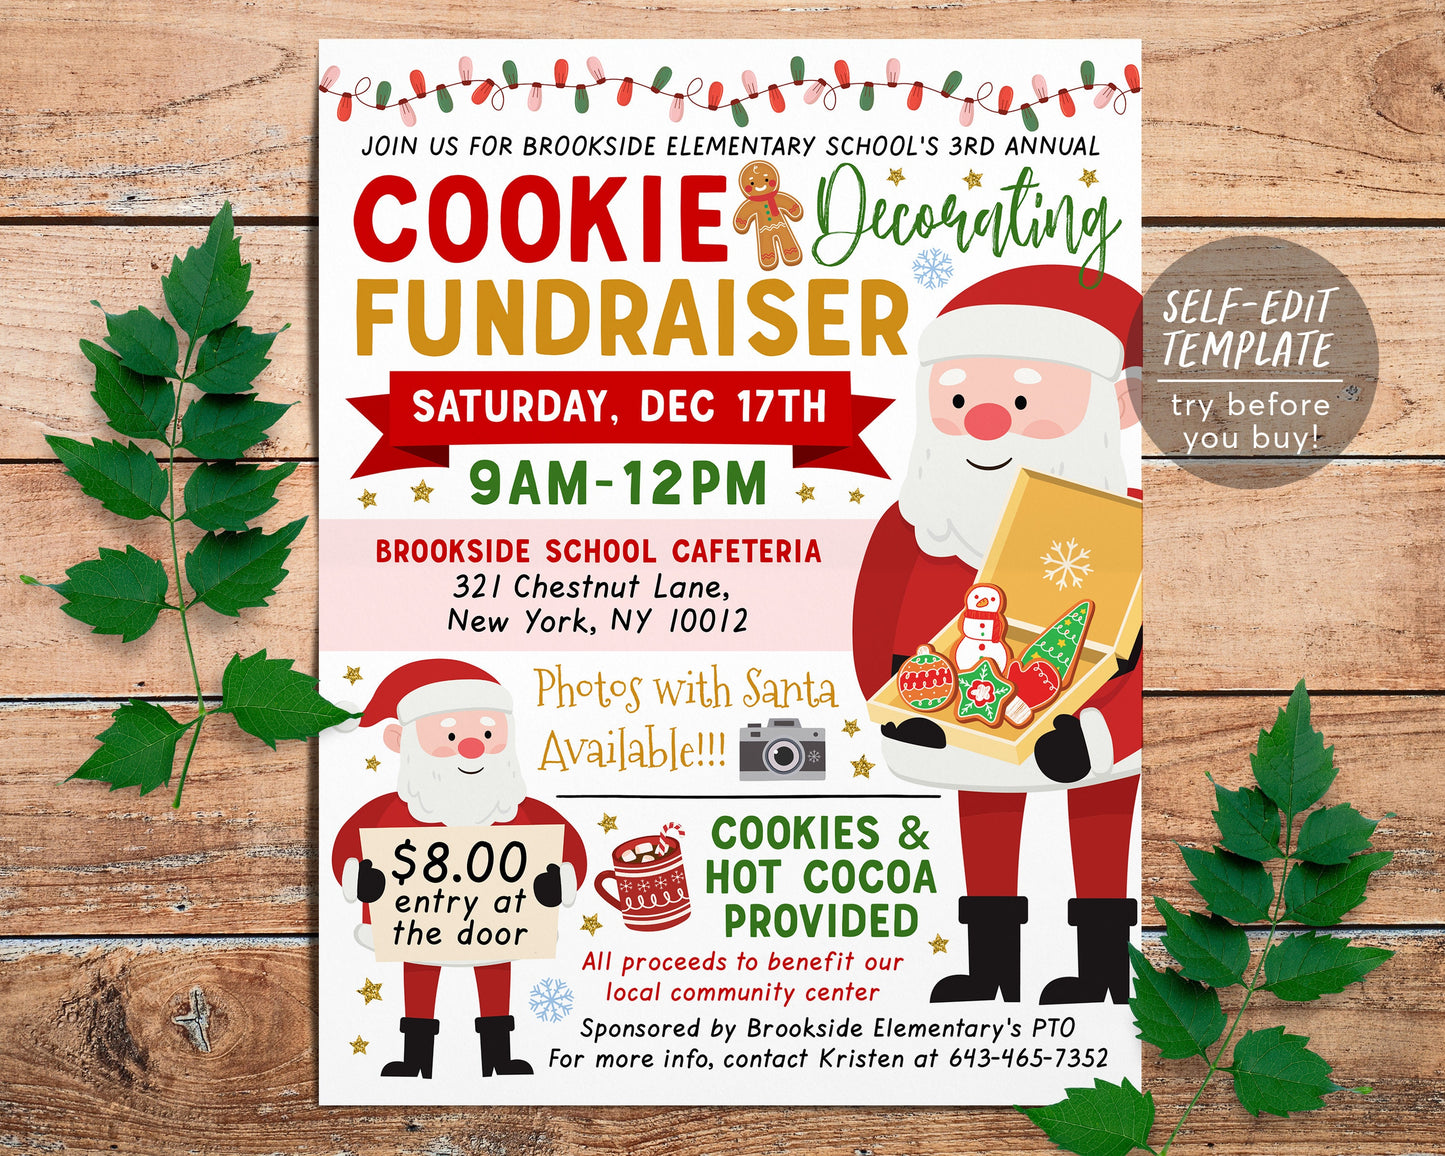 Christmas Cookie Decorating Flyer Editable Template, Holiday Cookie Decorating Fundraiser Charity Event, Church School Community Fundraiser